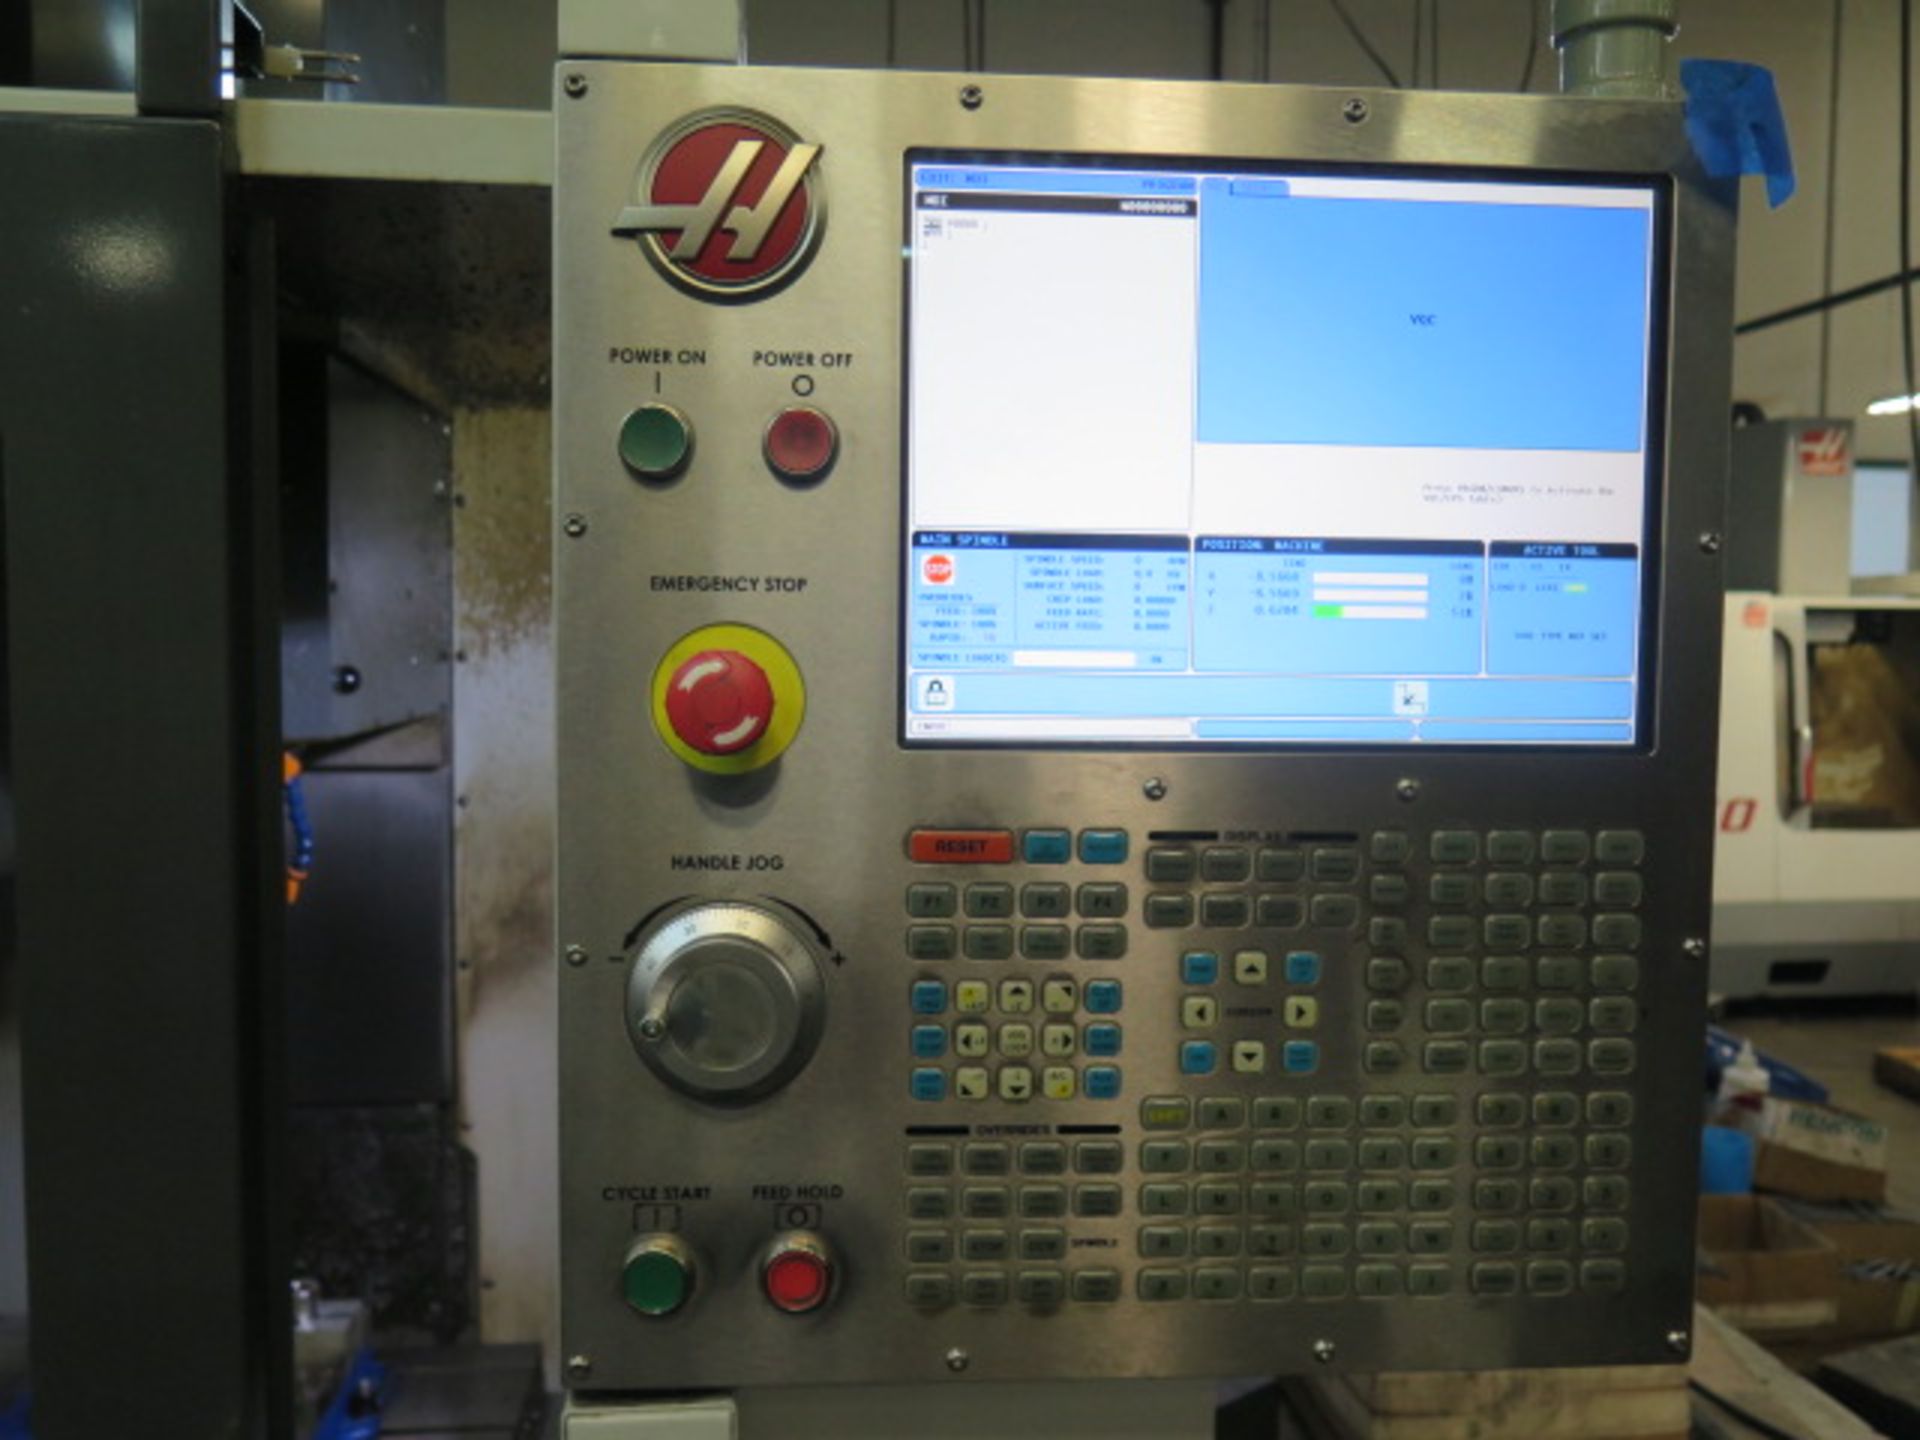 DEC/2014 Haas DT-1 CNC VMC s/n 1118934 w/ Haas Controls, 20-Station ATC, BT-30, SOLD AS IS - Image 12 of 16